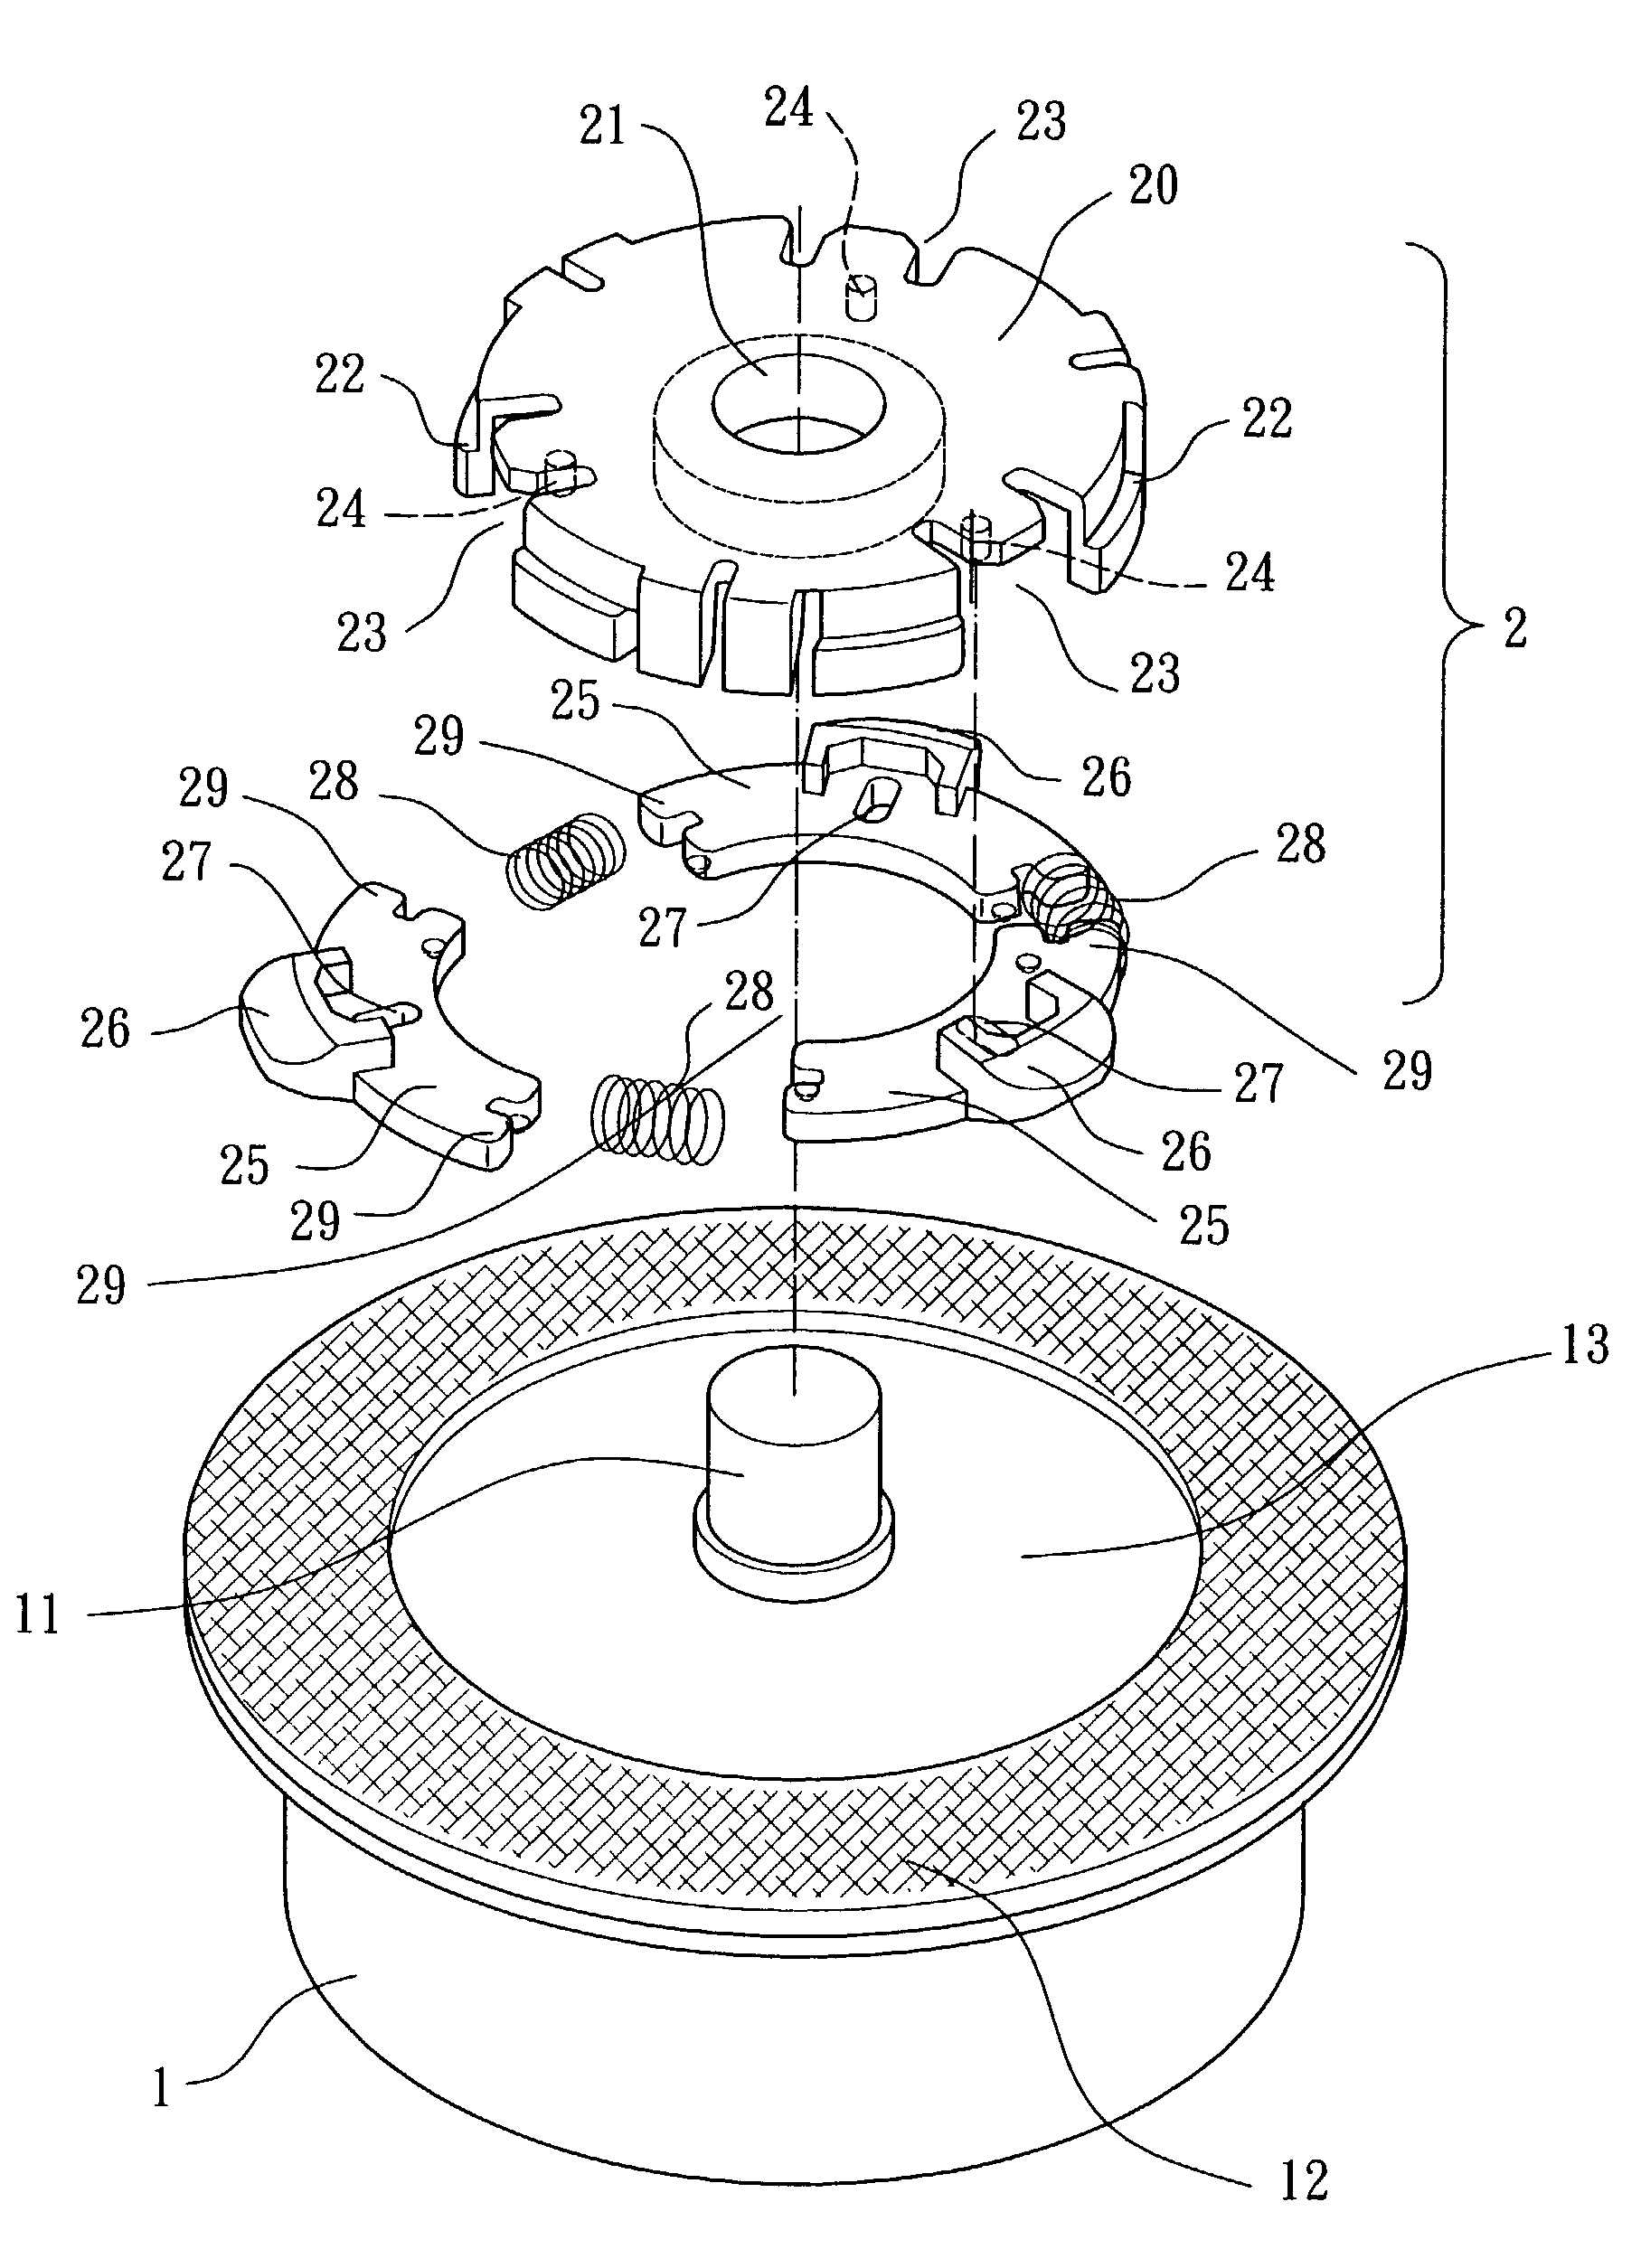 Holding device for an optical disk drive